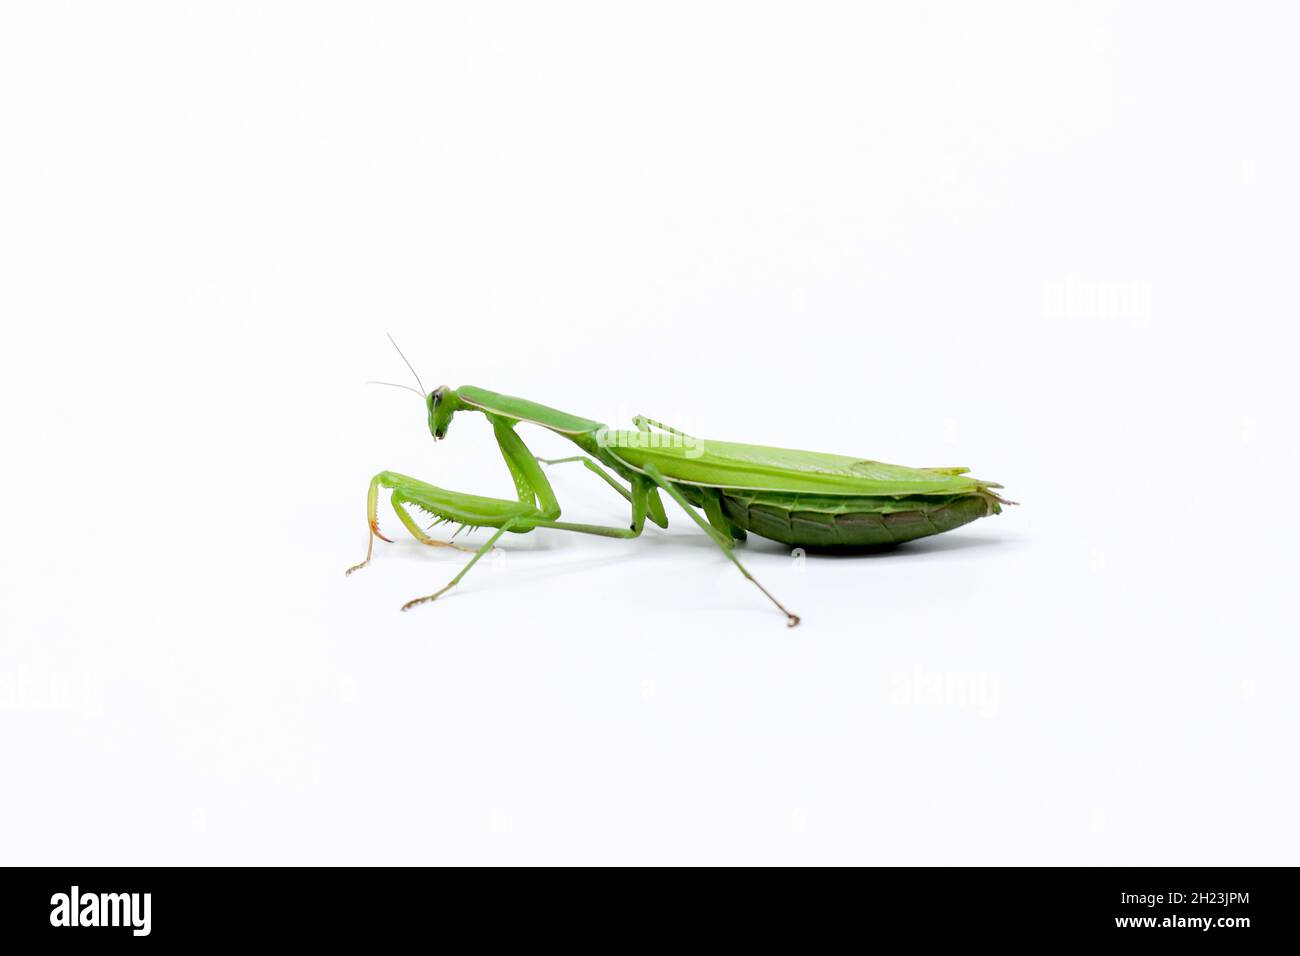 green female praying mantis eating a cricket. insect on a white background. close-up Stock Photo